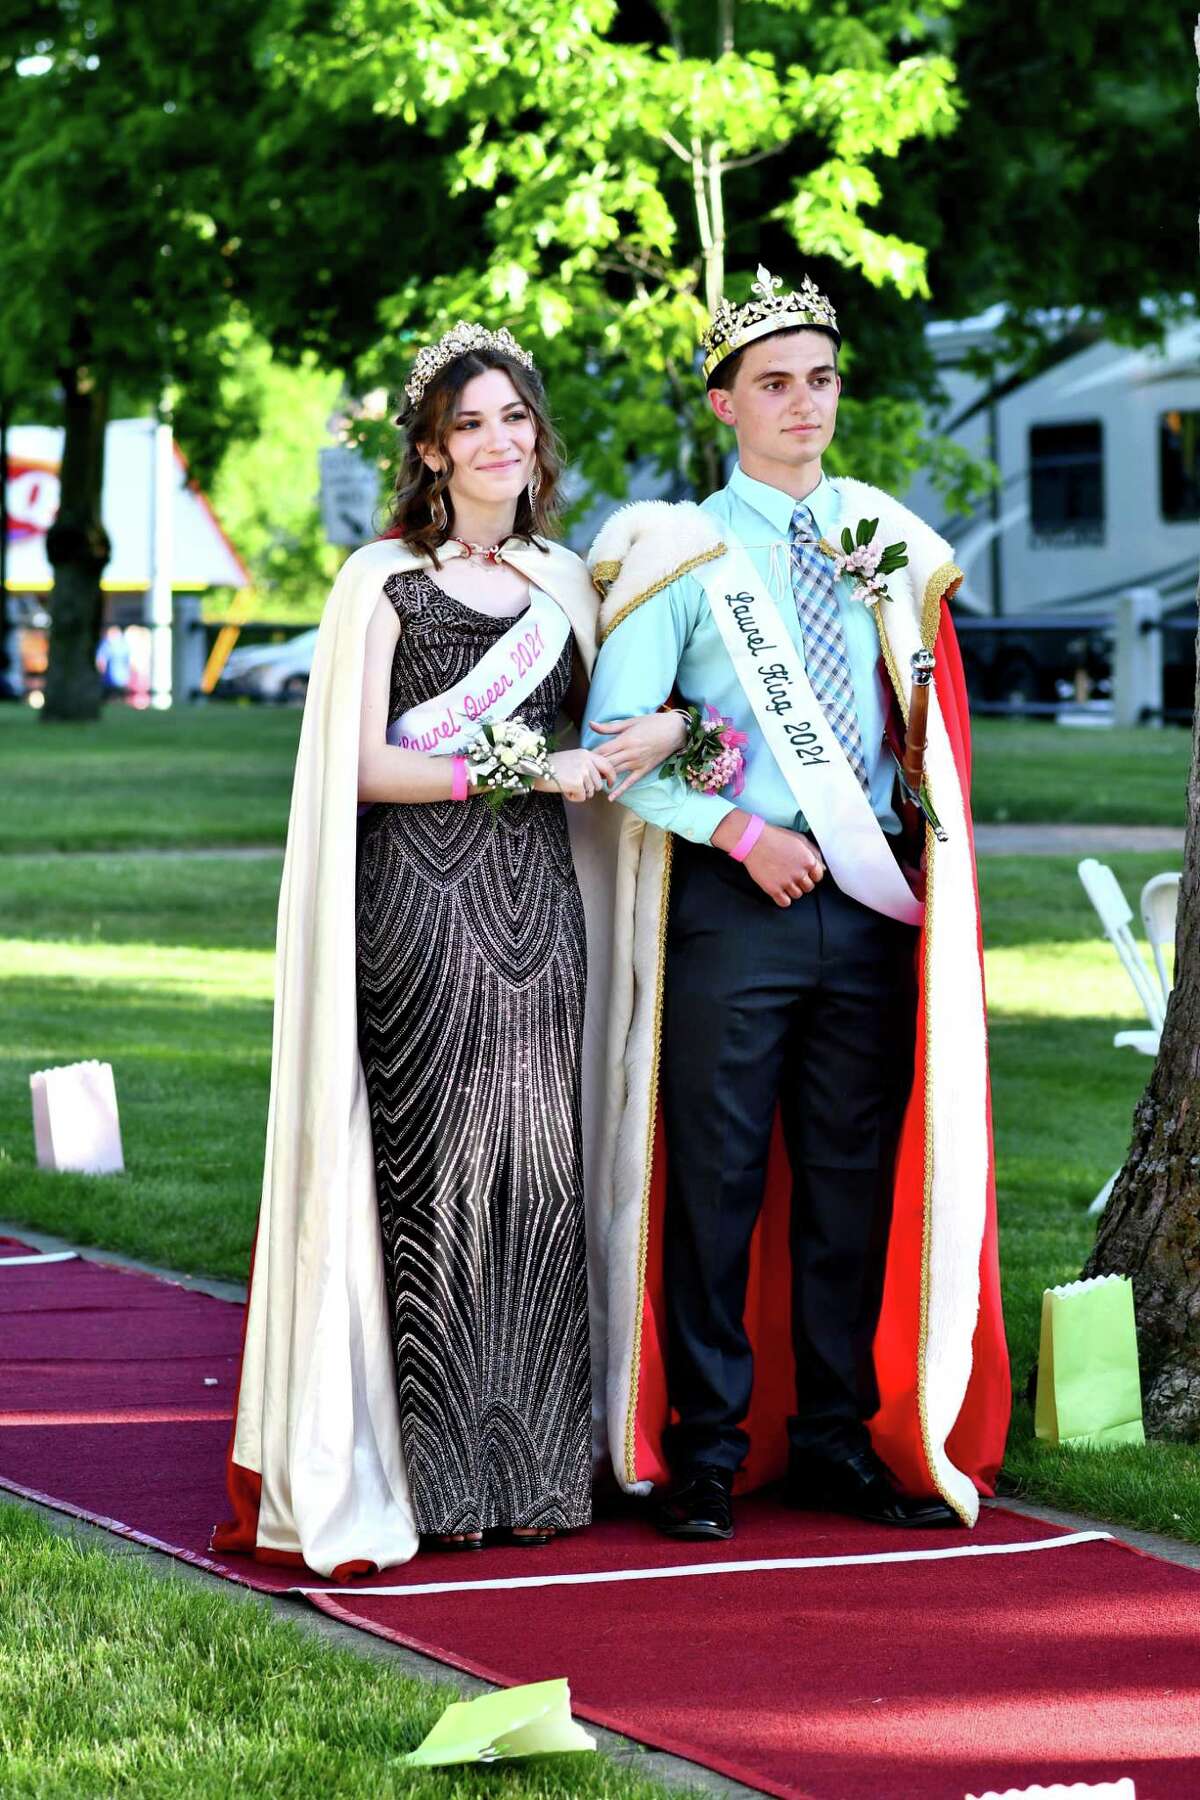 The Laurel Fesival in Winsted wrapped up with a Laurel Ball and crowning of this year's Laurel Queen and King. The event was held Saturday June 4, 2022 at East End Park. Pictured are 2021 winners Rebecca Dowling and Caleb Goodell.